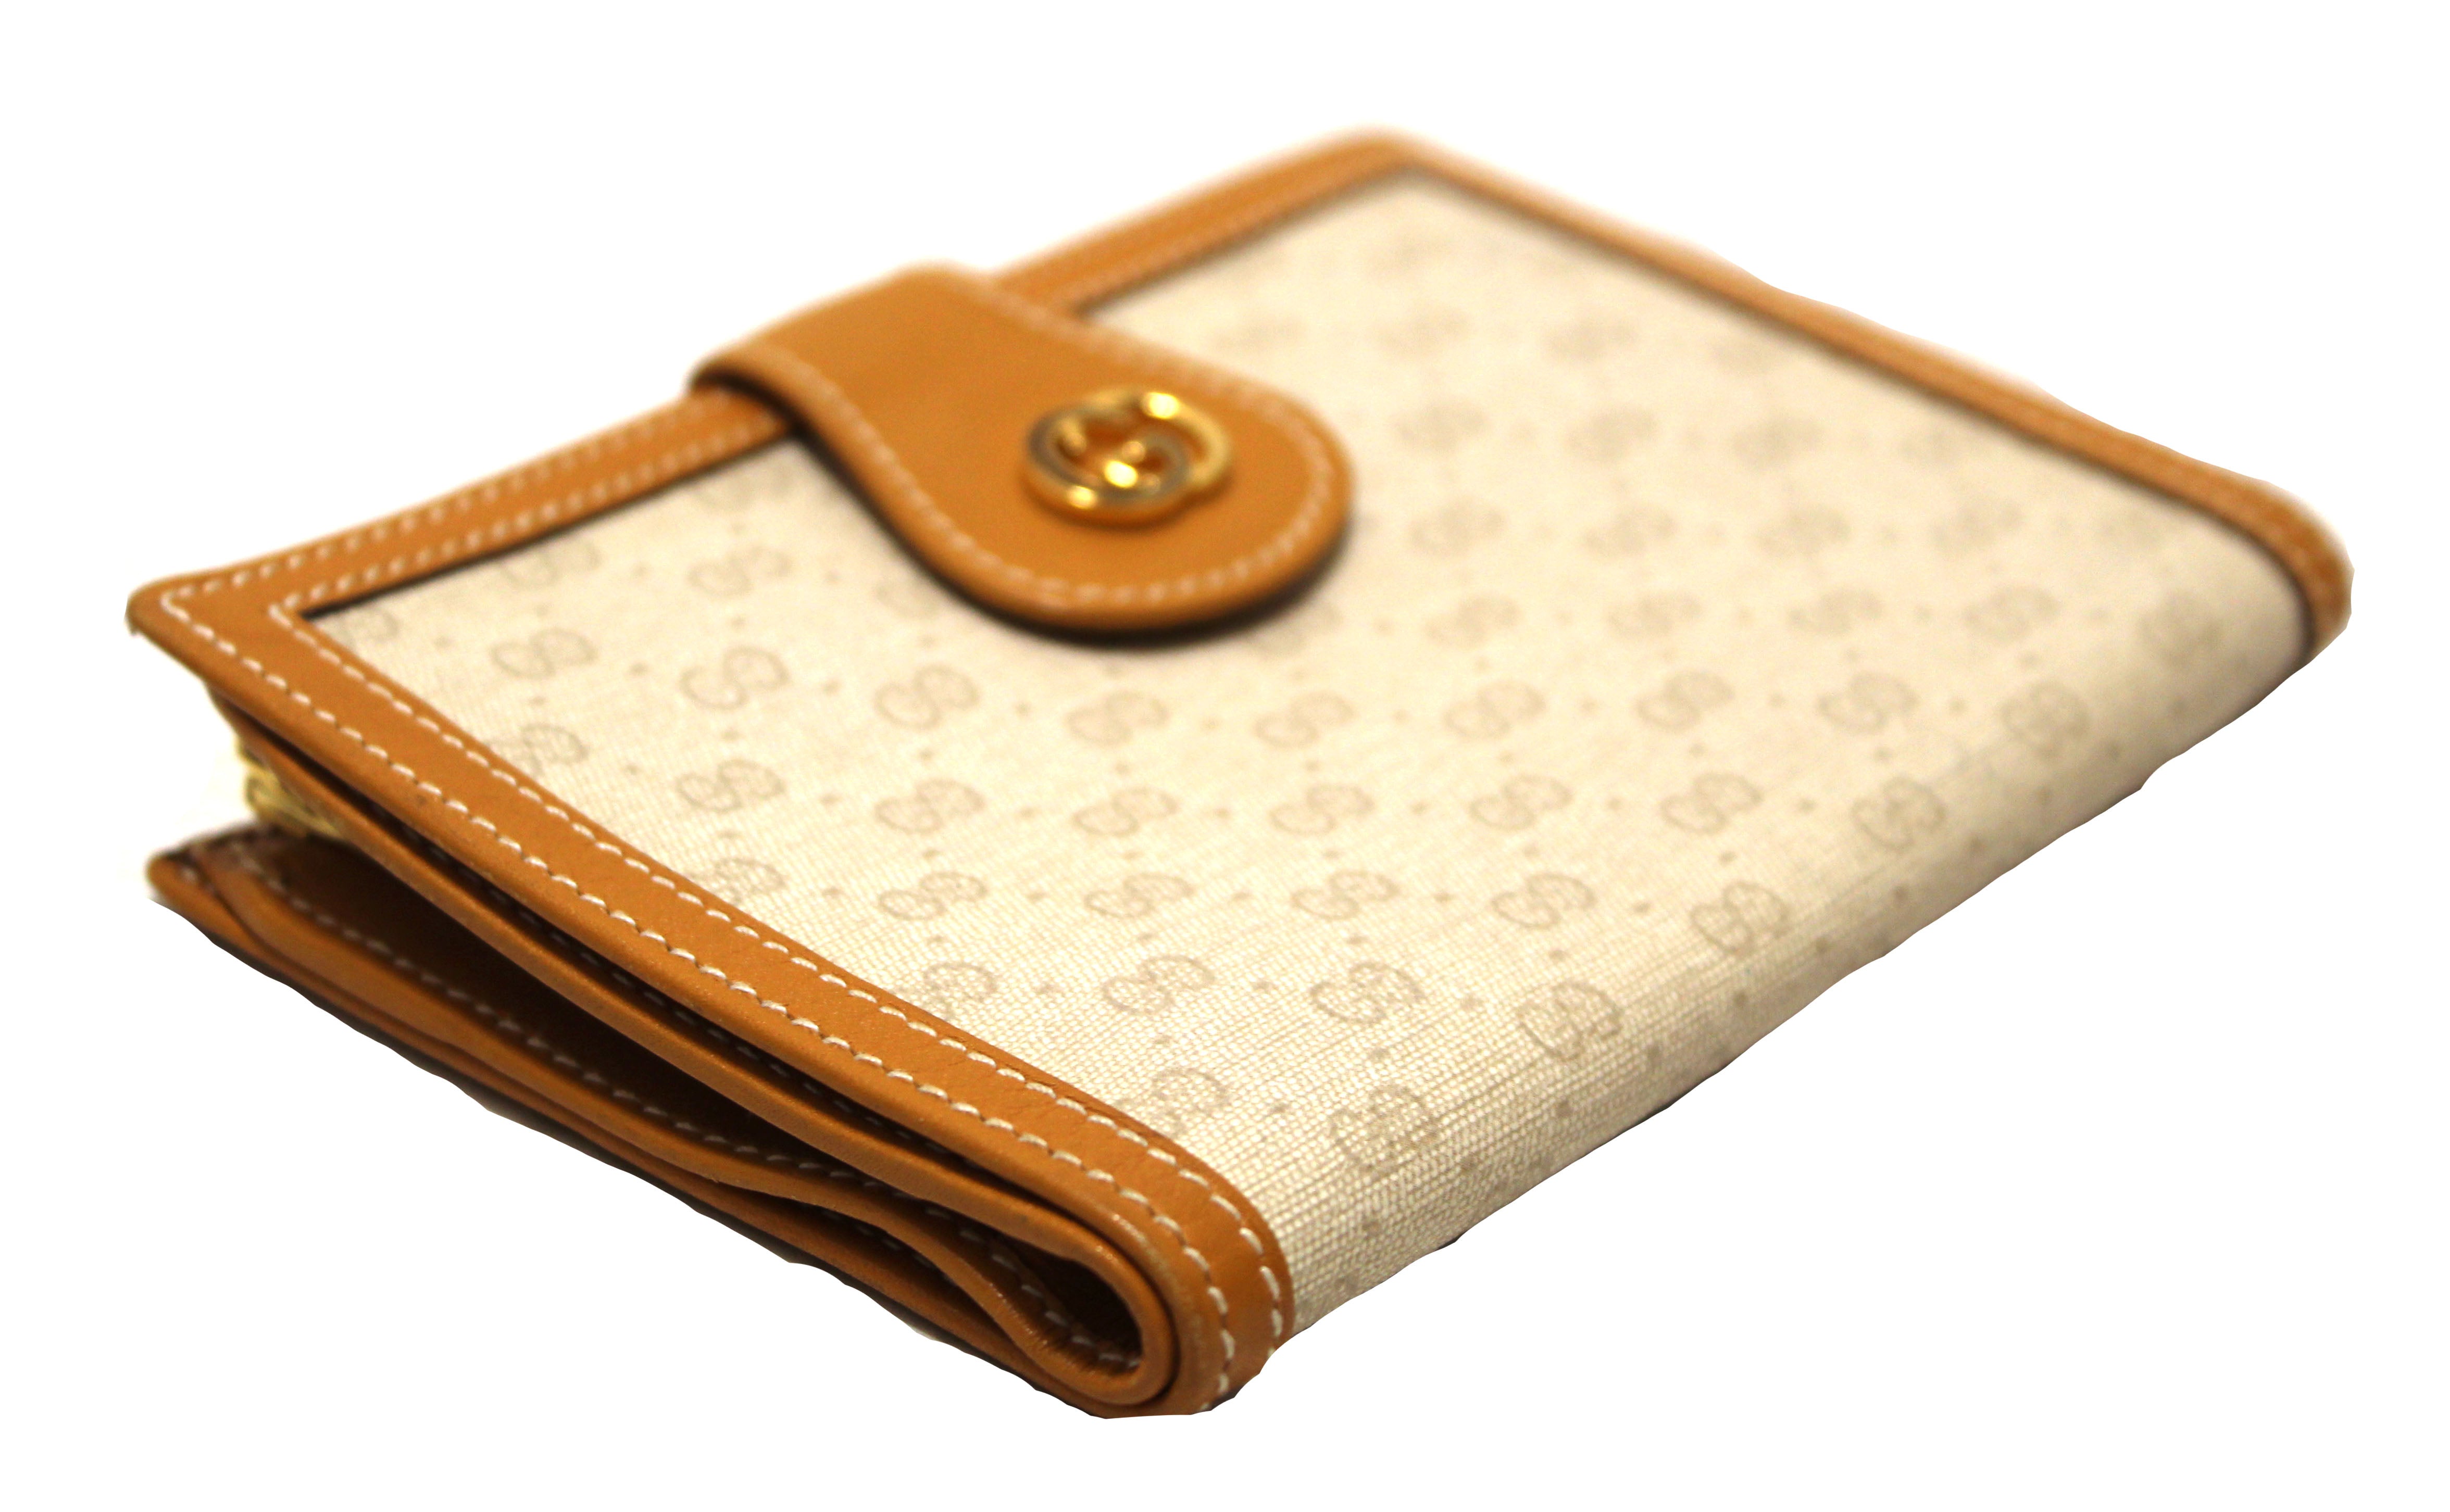 Authentic Gucci Vintage Beige Microguccissima with Yellow Leather Trim Bilfold Wallet